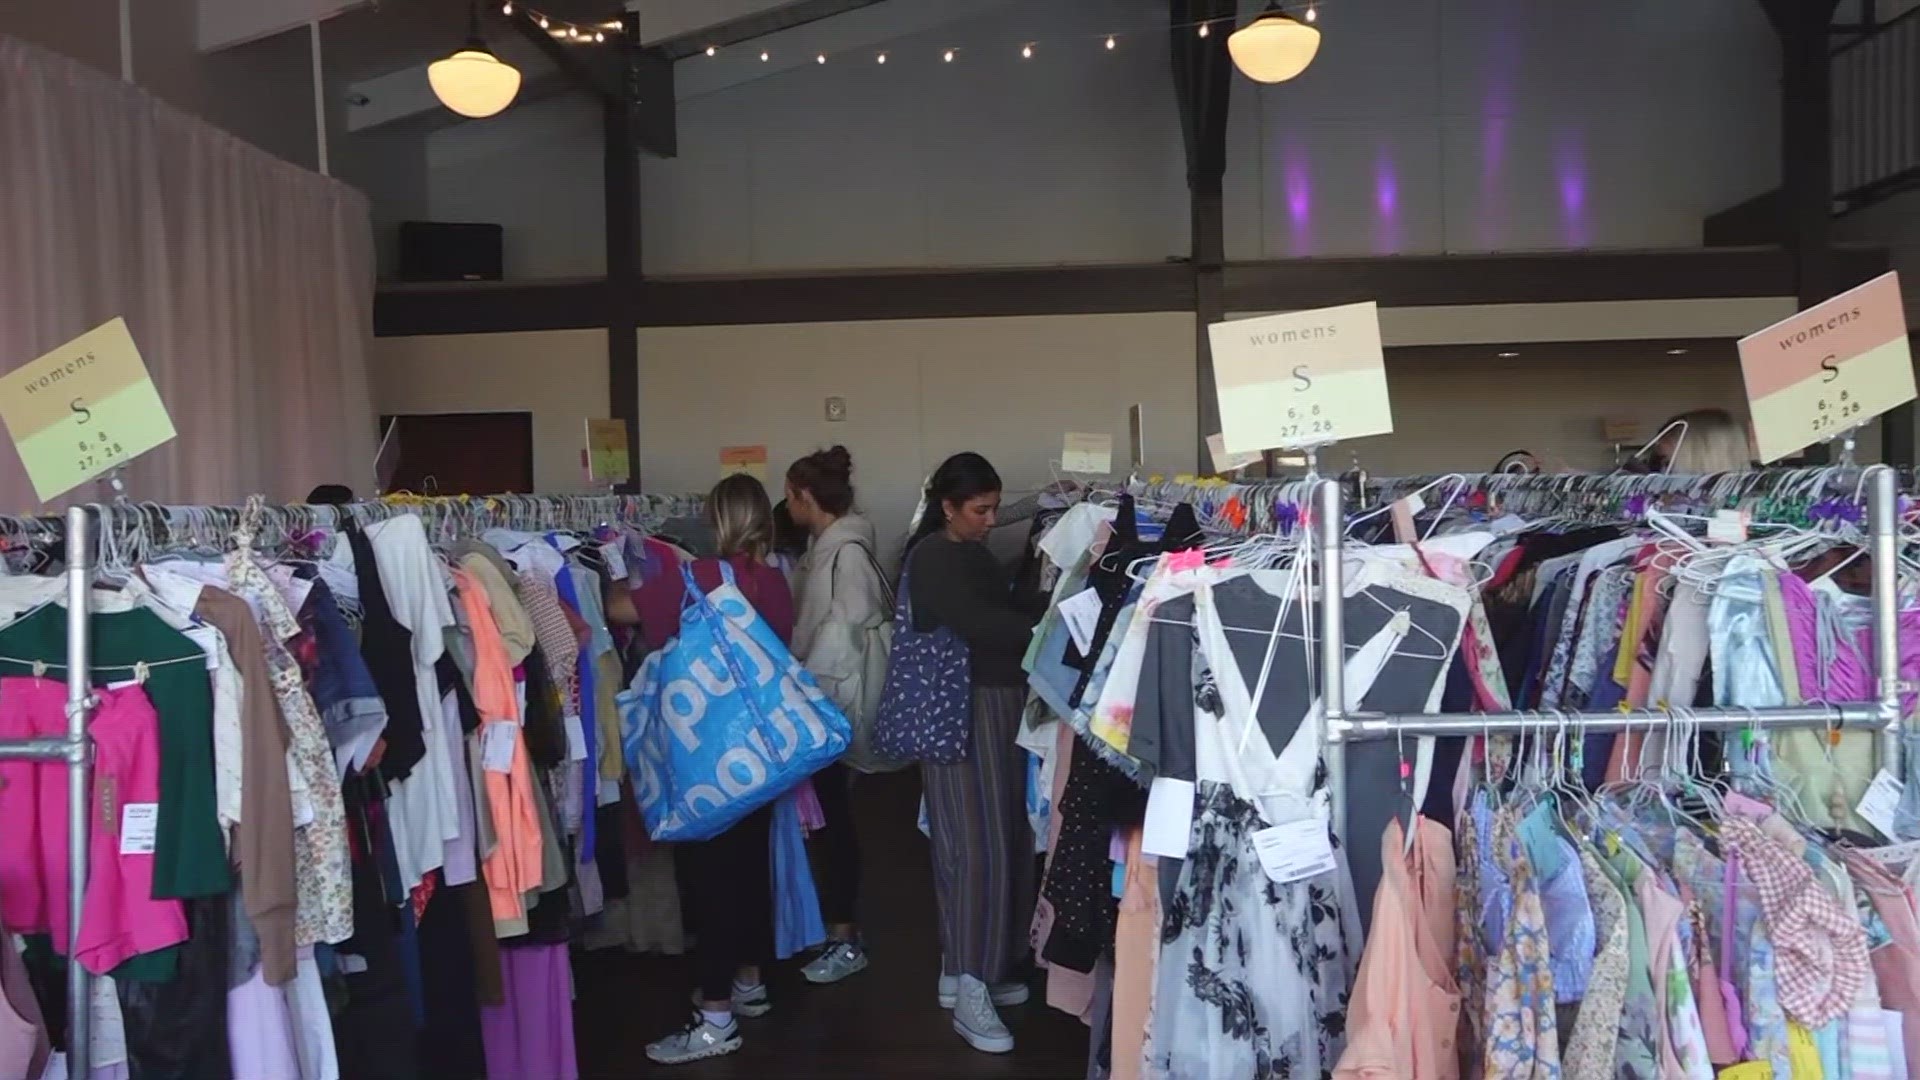 Consignment sale kicks off, helping charity